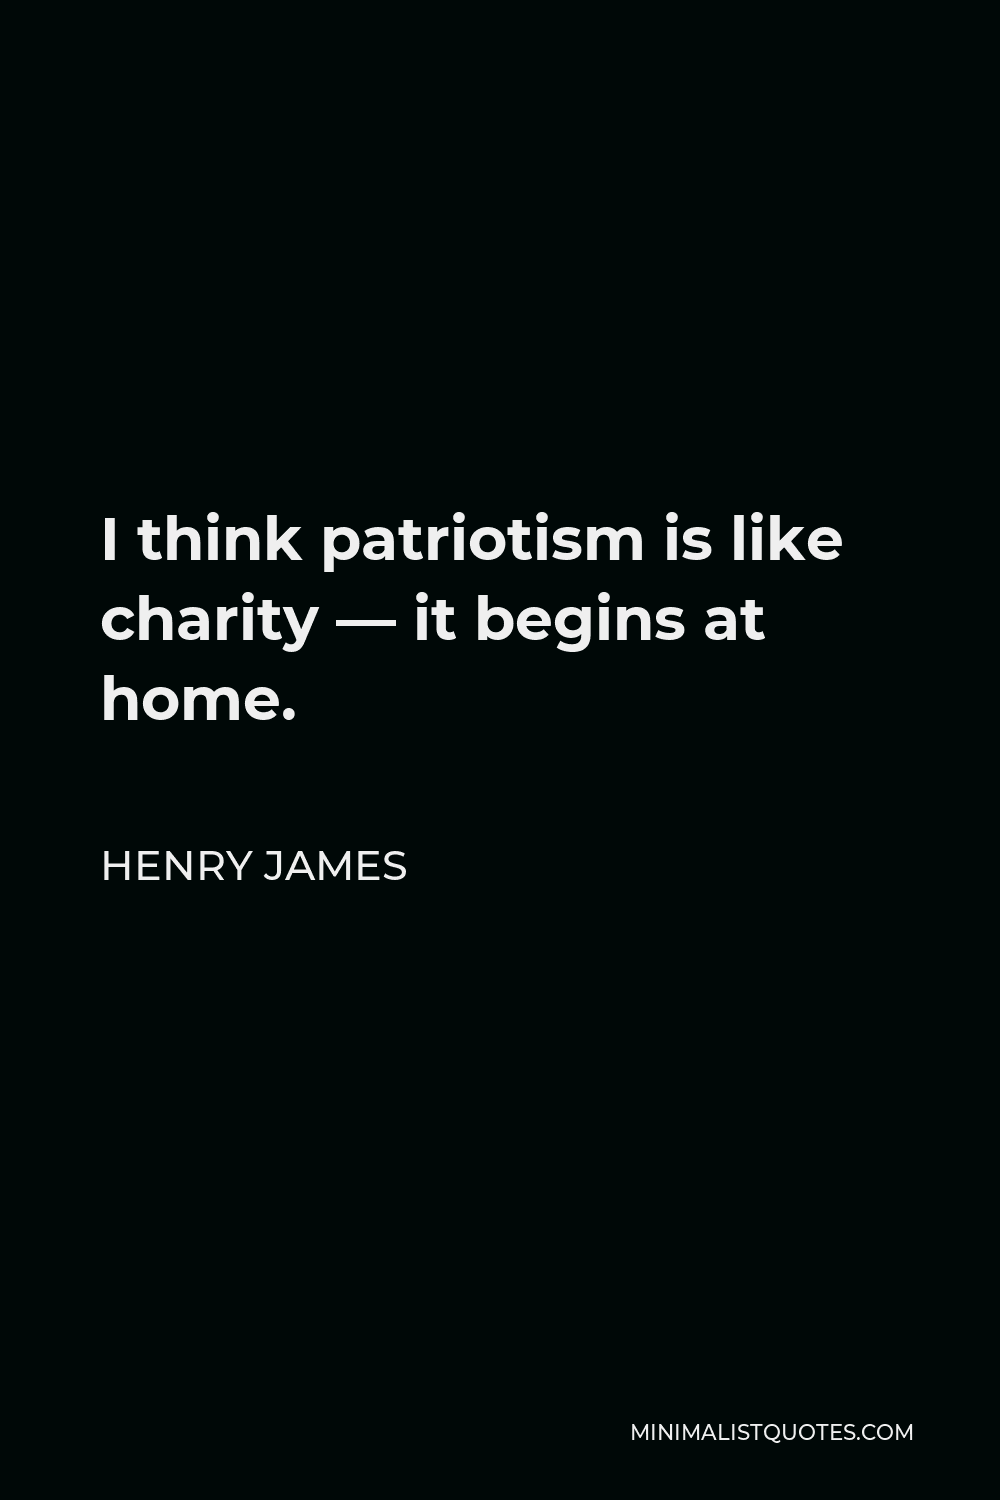 Henry James Quote - I think patriotism is like charity — it begins at home.